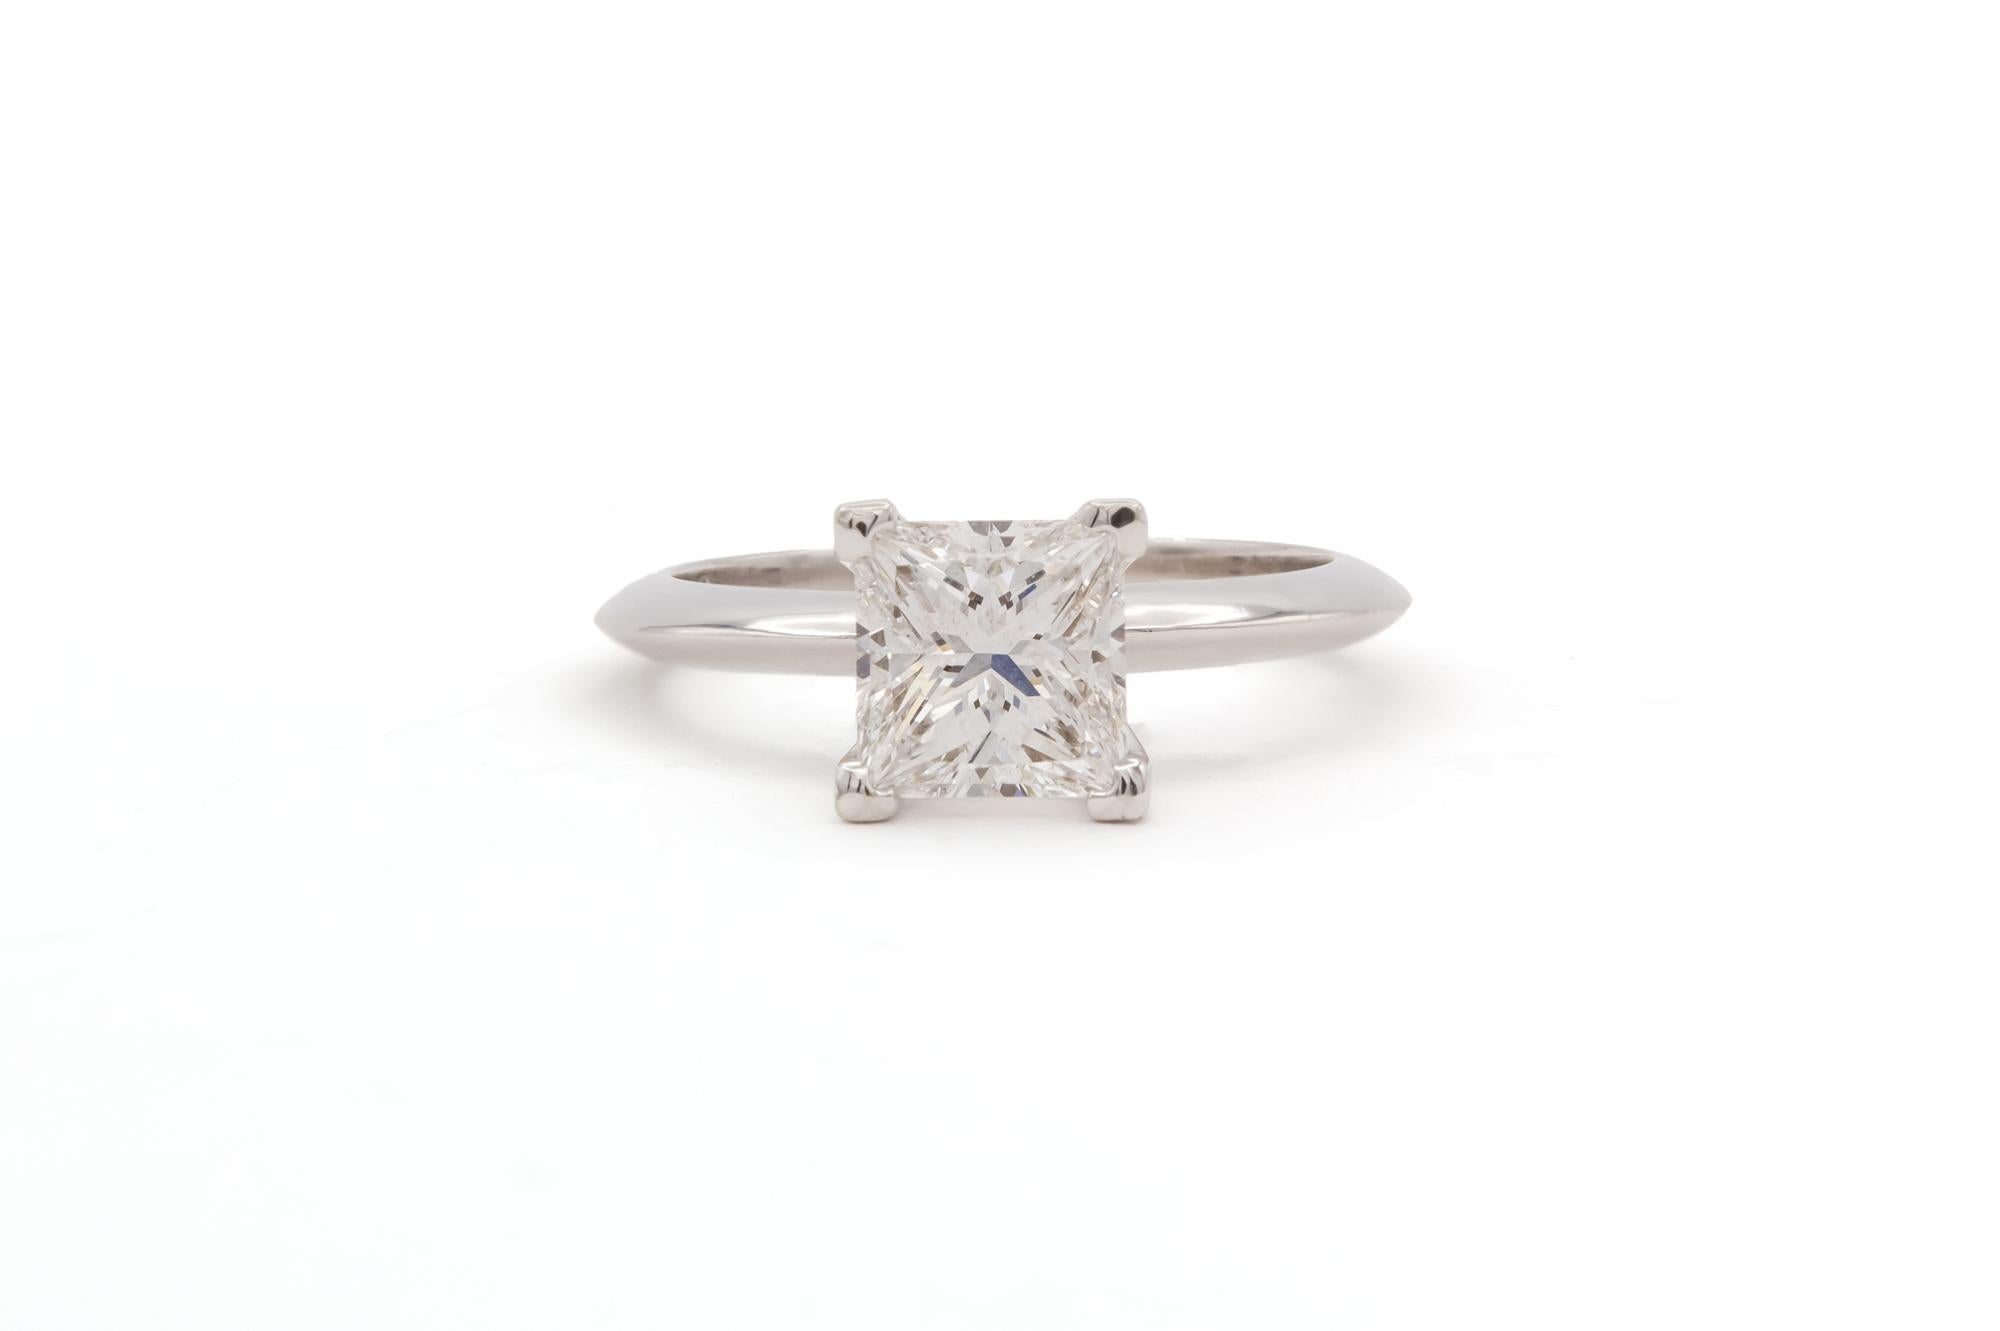 We are pleased to offer this GIA Certified Platinum & Princess Cut Diamond Solitaire Engagement Ring. This beautiful ring features a GIA certified & laser inscribed 1.65ct D/VS2 princess cut diamond set in a classic platinum 4 prong knife edge